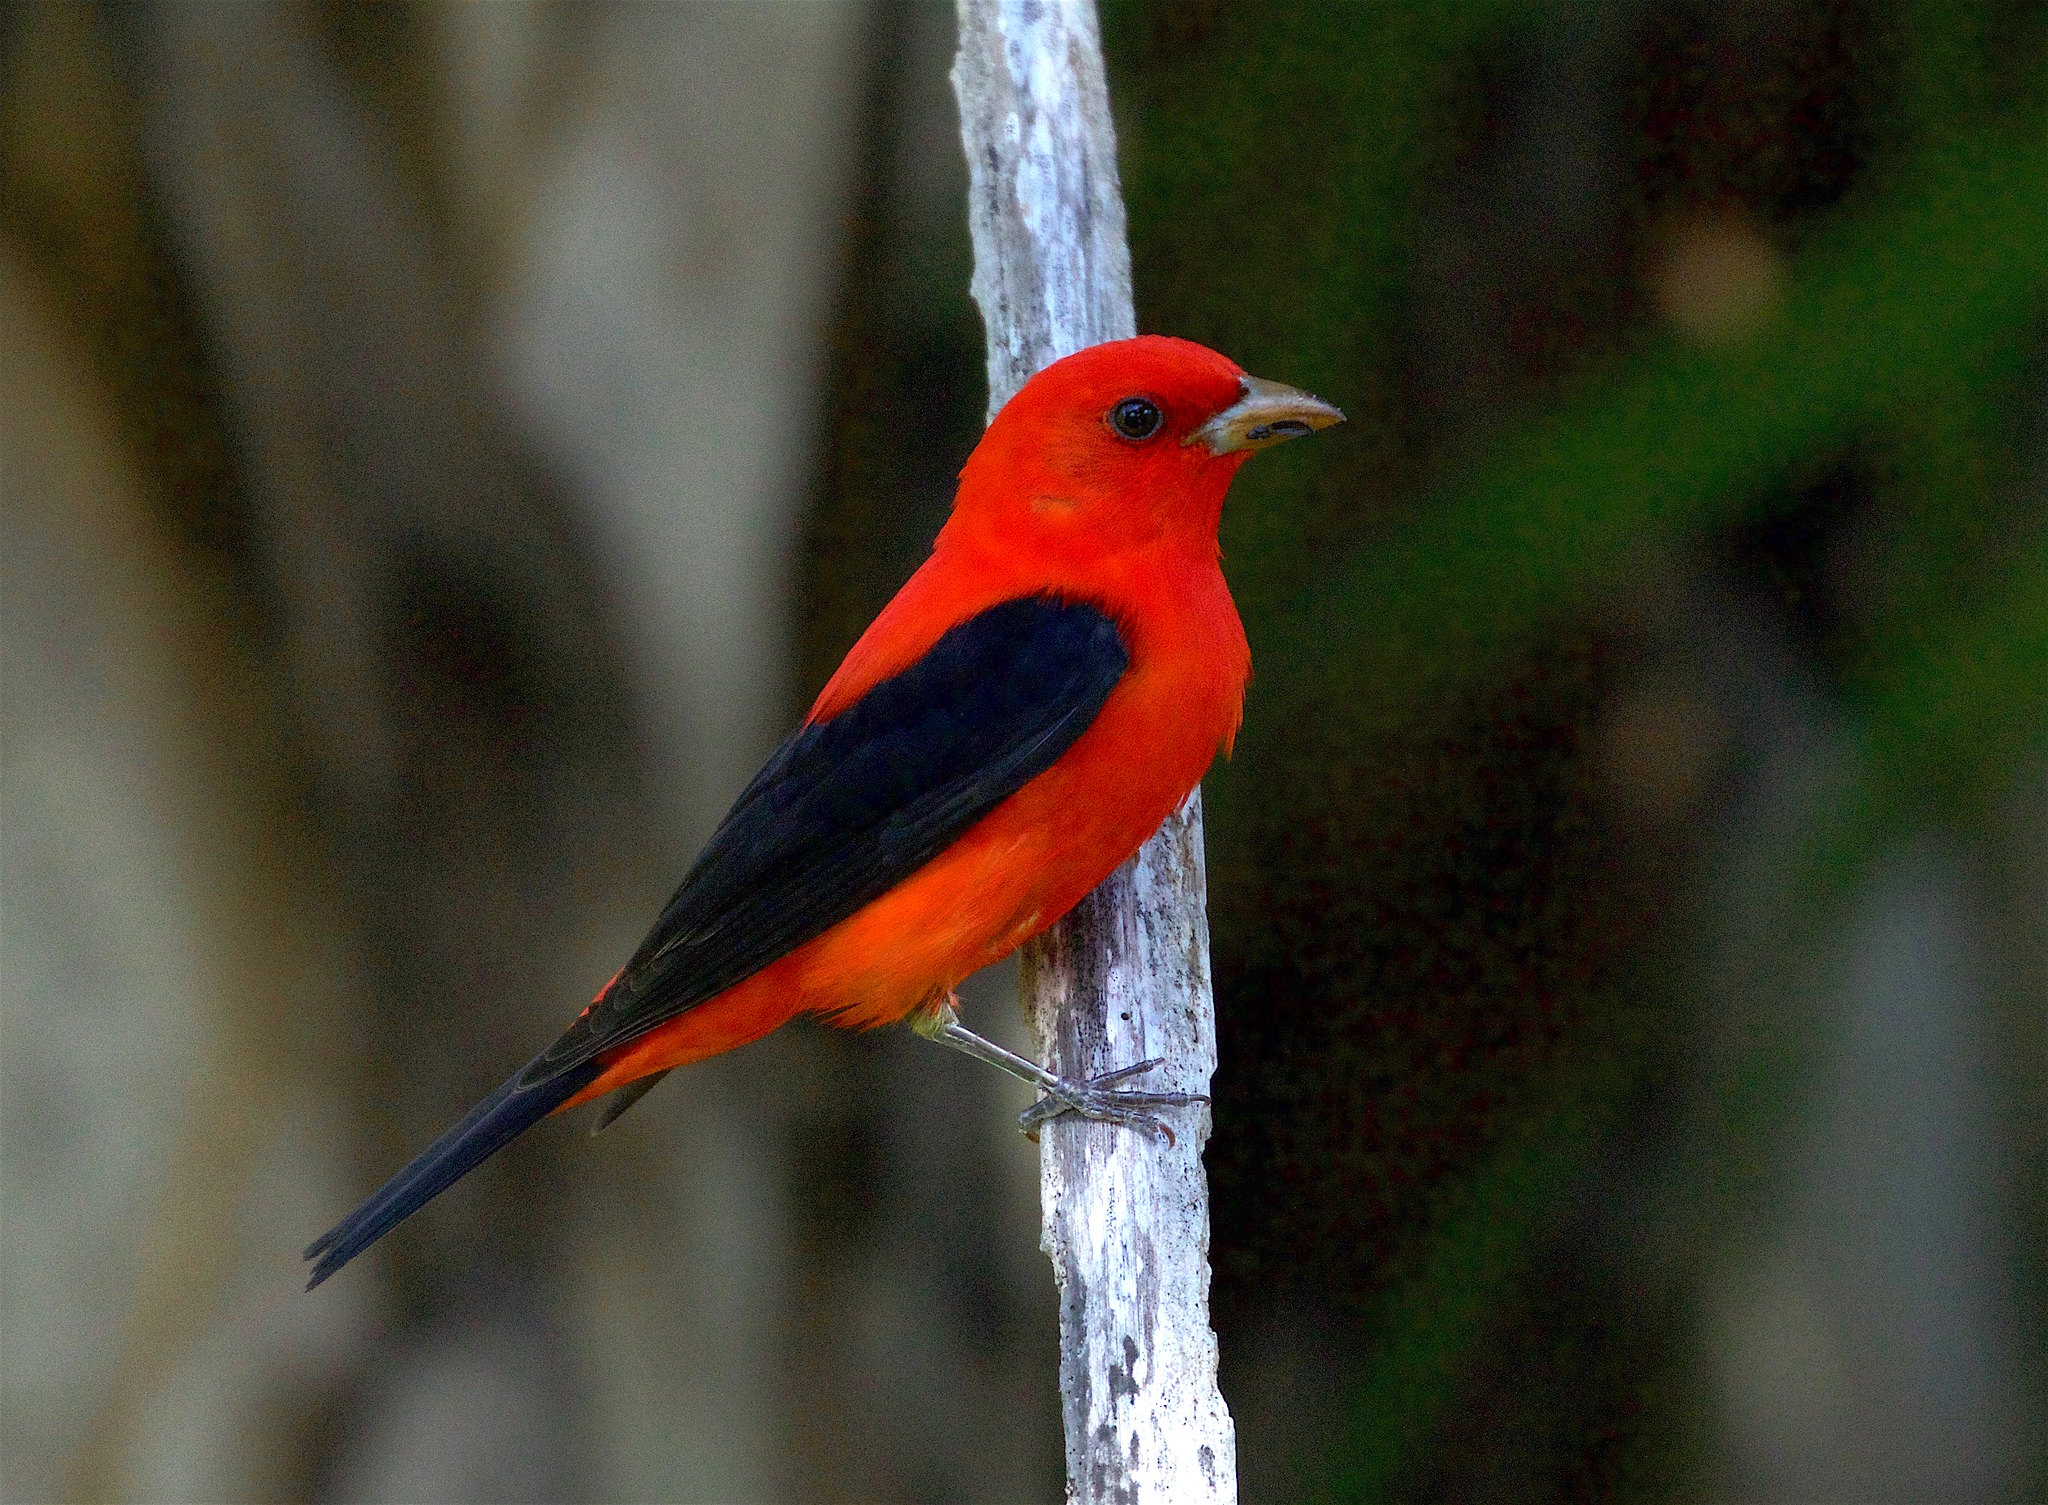 A brilliant red and black Scarlet Tanager, perched on a gray branch. (photo © Scott Hecker via the Fllickr Creative Commons)